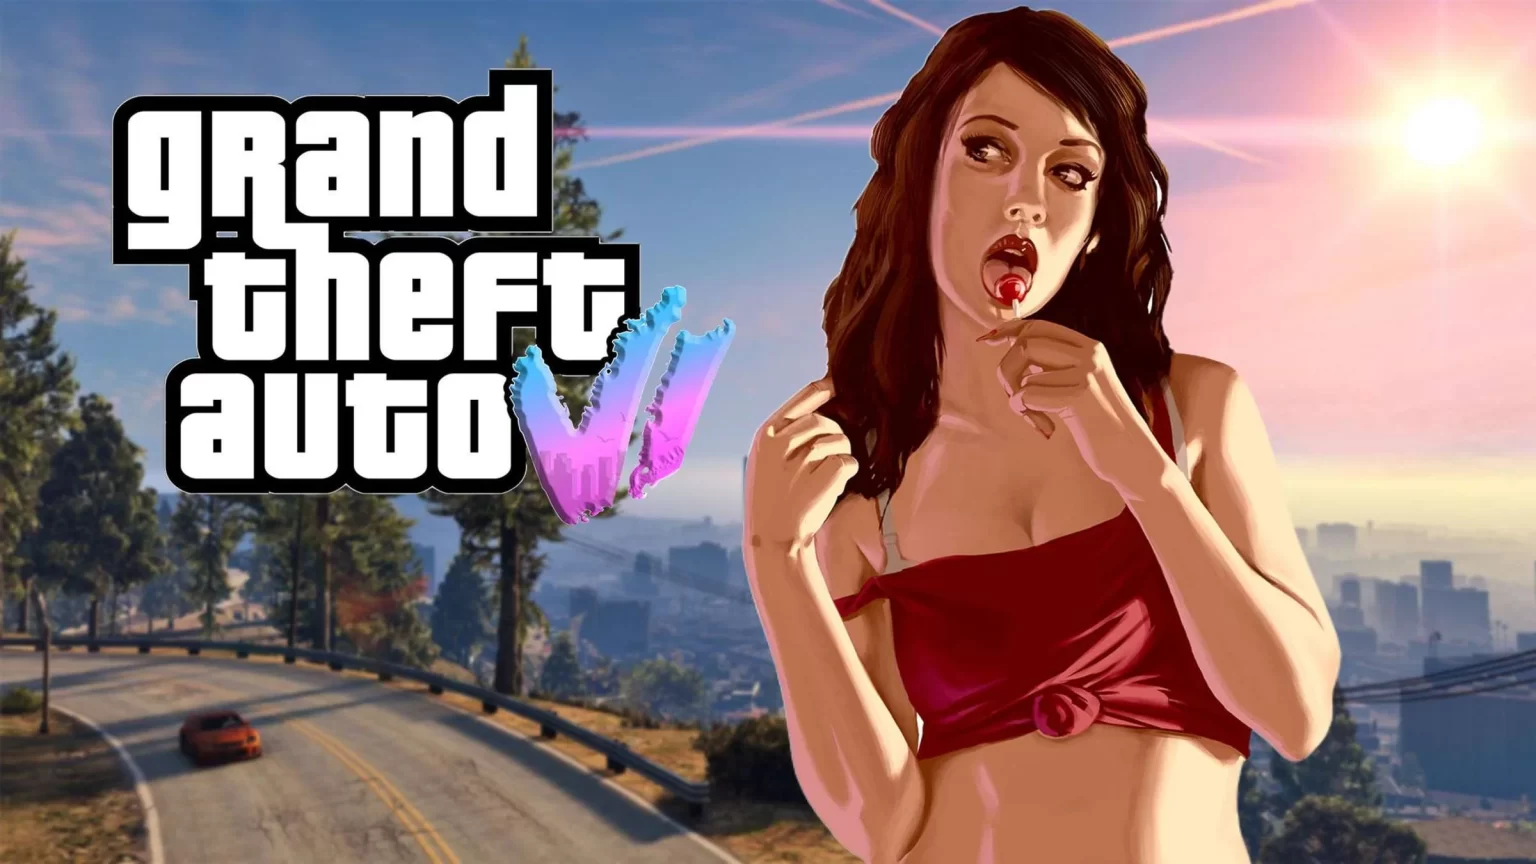 29617003 gta 6 release imdb leak 2025 rockstar games 2iRJqyTdquea 1536x864 - A potential GTA 6 trailer reportedly leaked before the official reveal